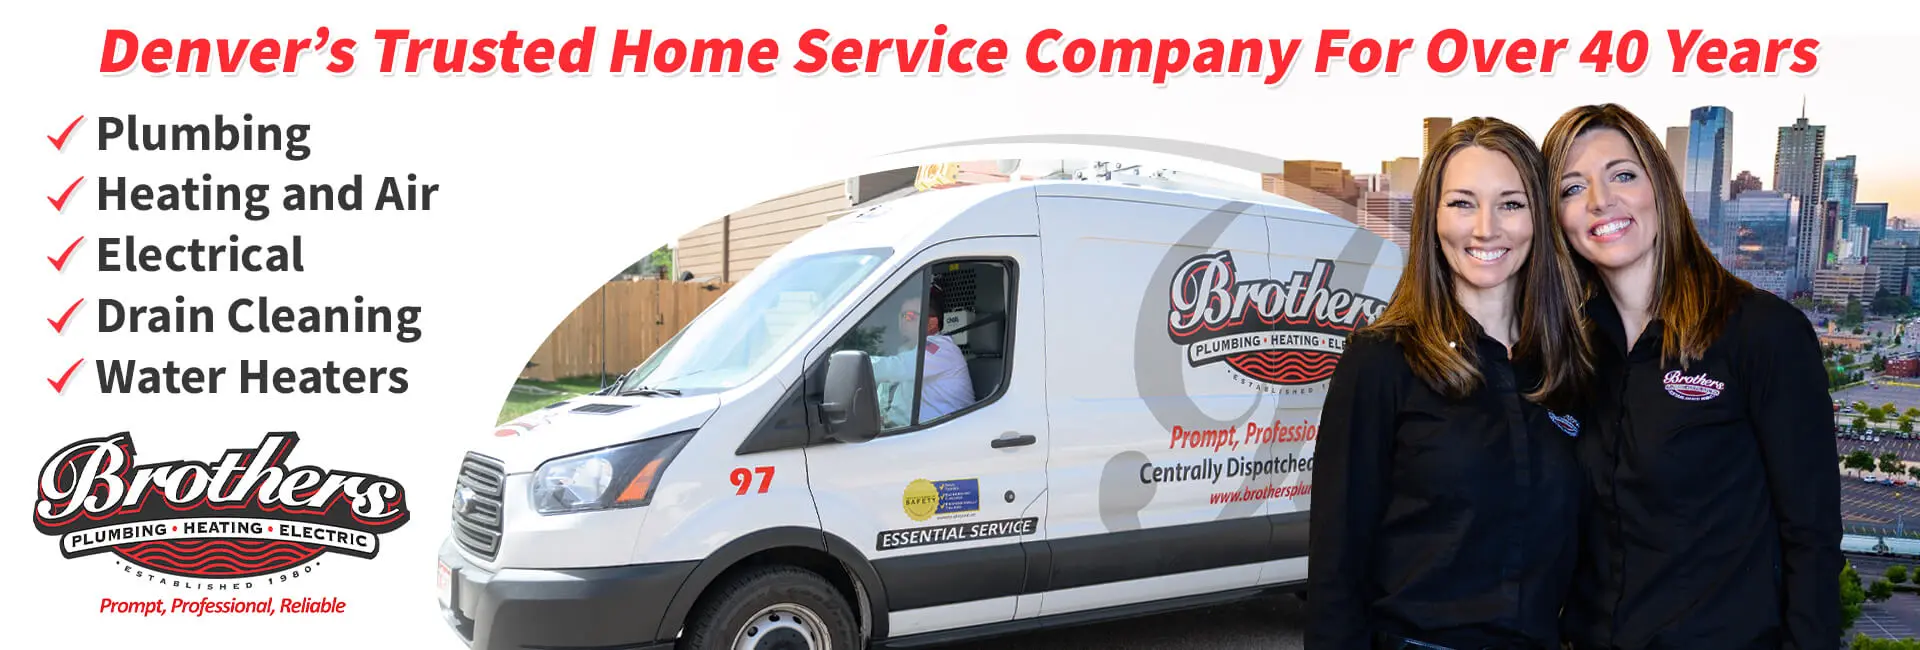 Commercial Water Heater Services & Products - 4 Star Plumbing Services